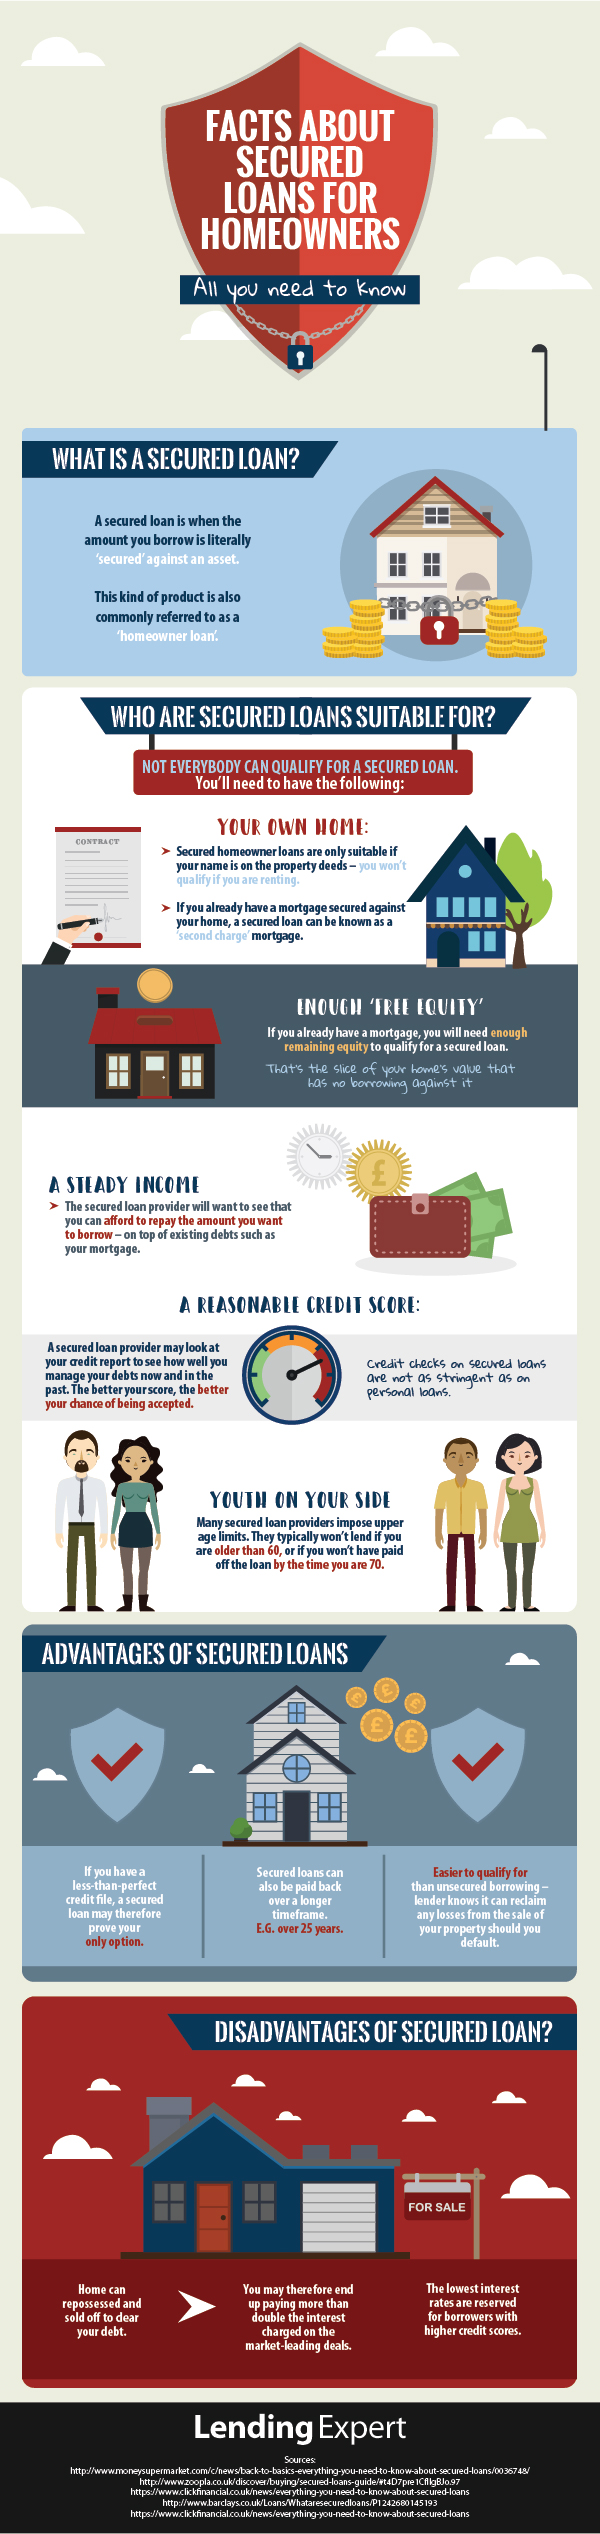 Infographic: Secured loans for homeowners explained